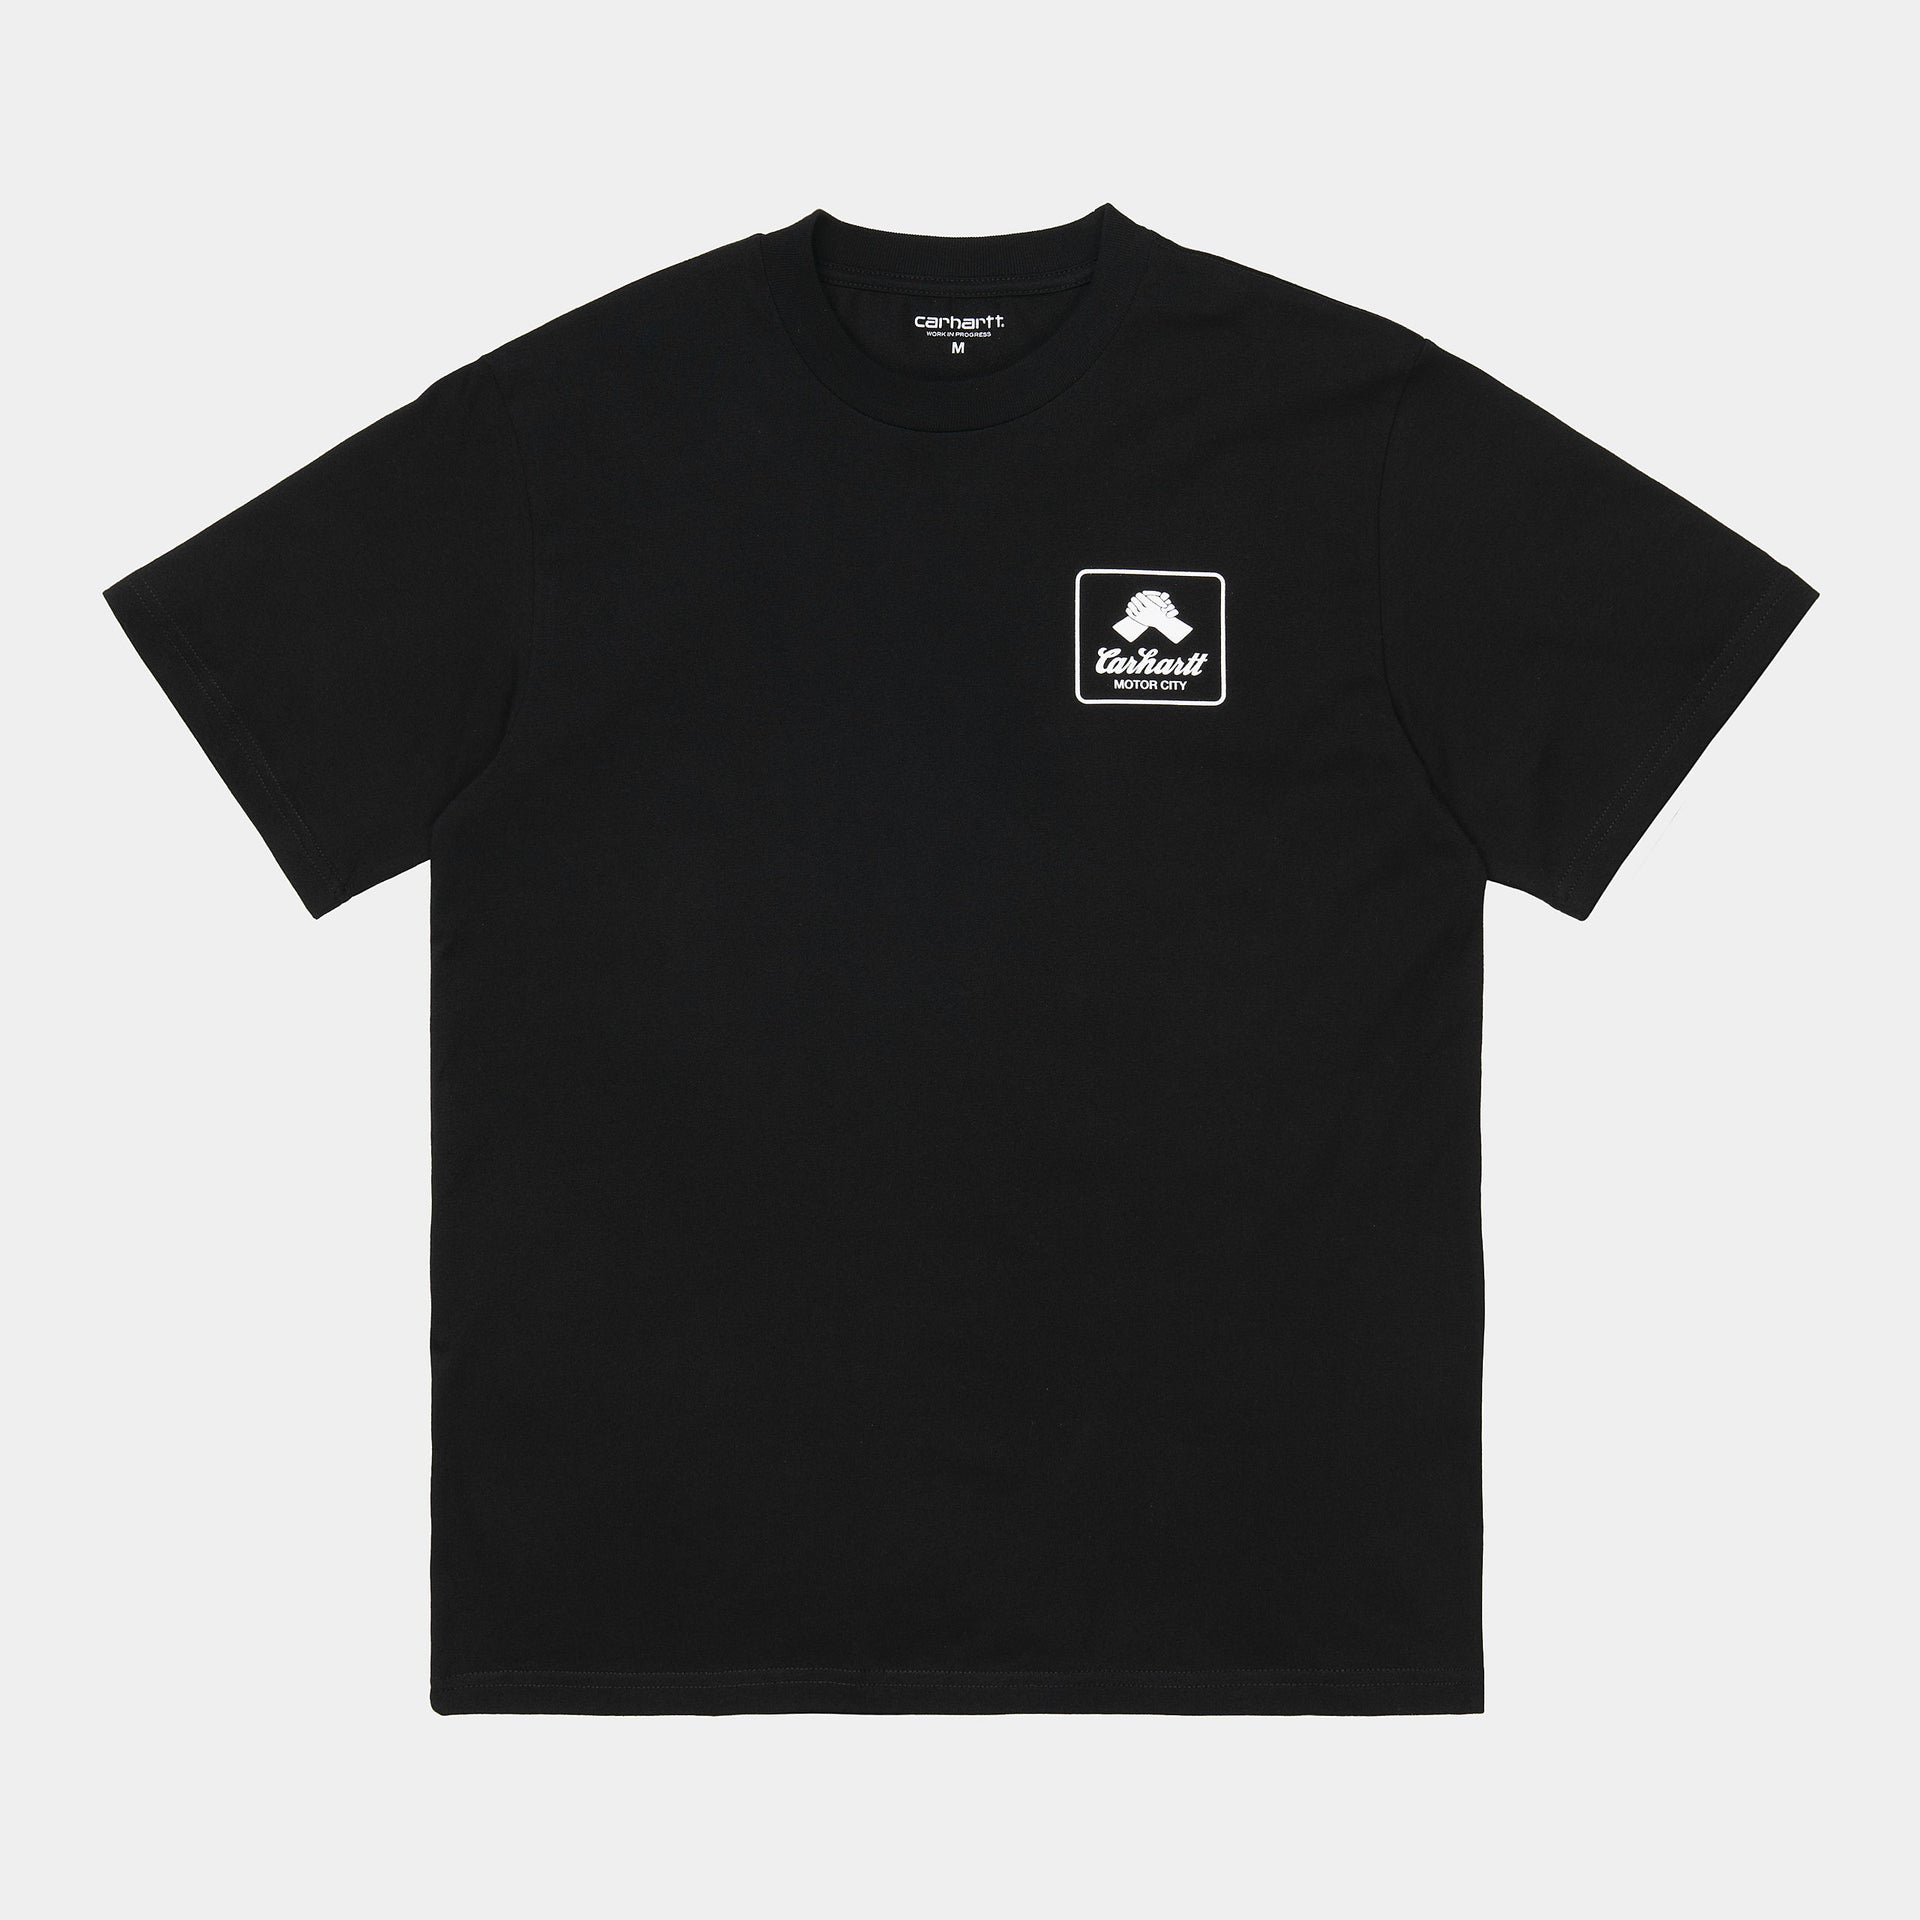 S/S Peace State T-shirt Black